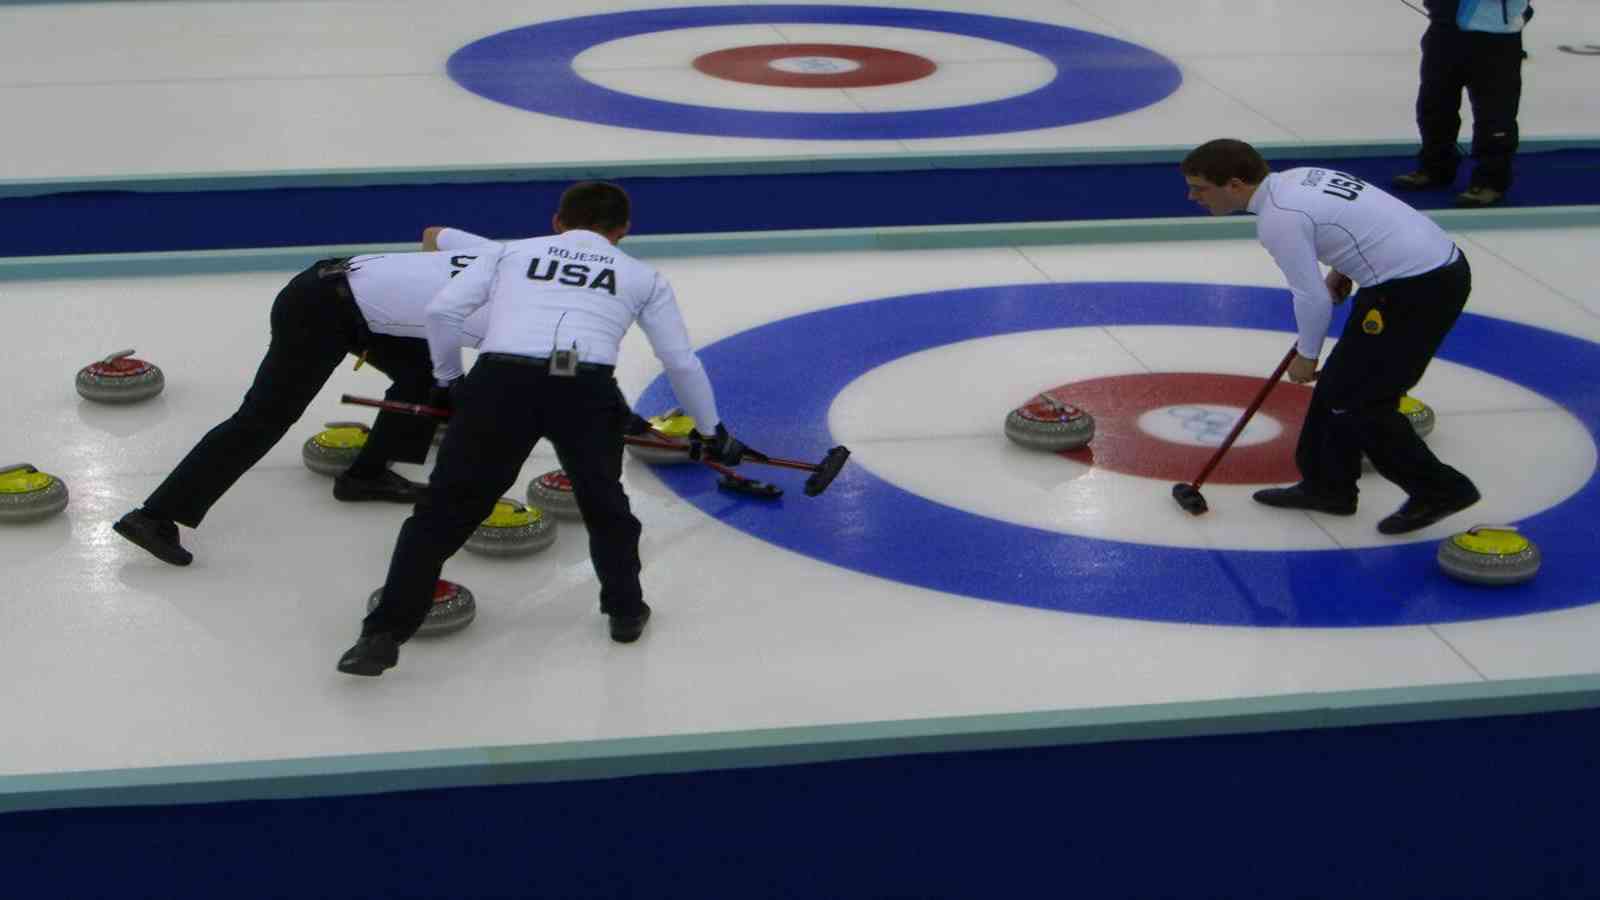 Curling Is Cool Day 2023: Date, History, Facts, Activities